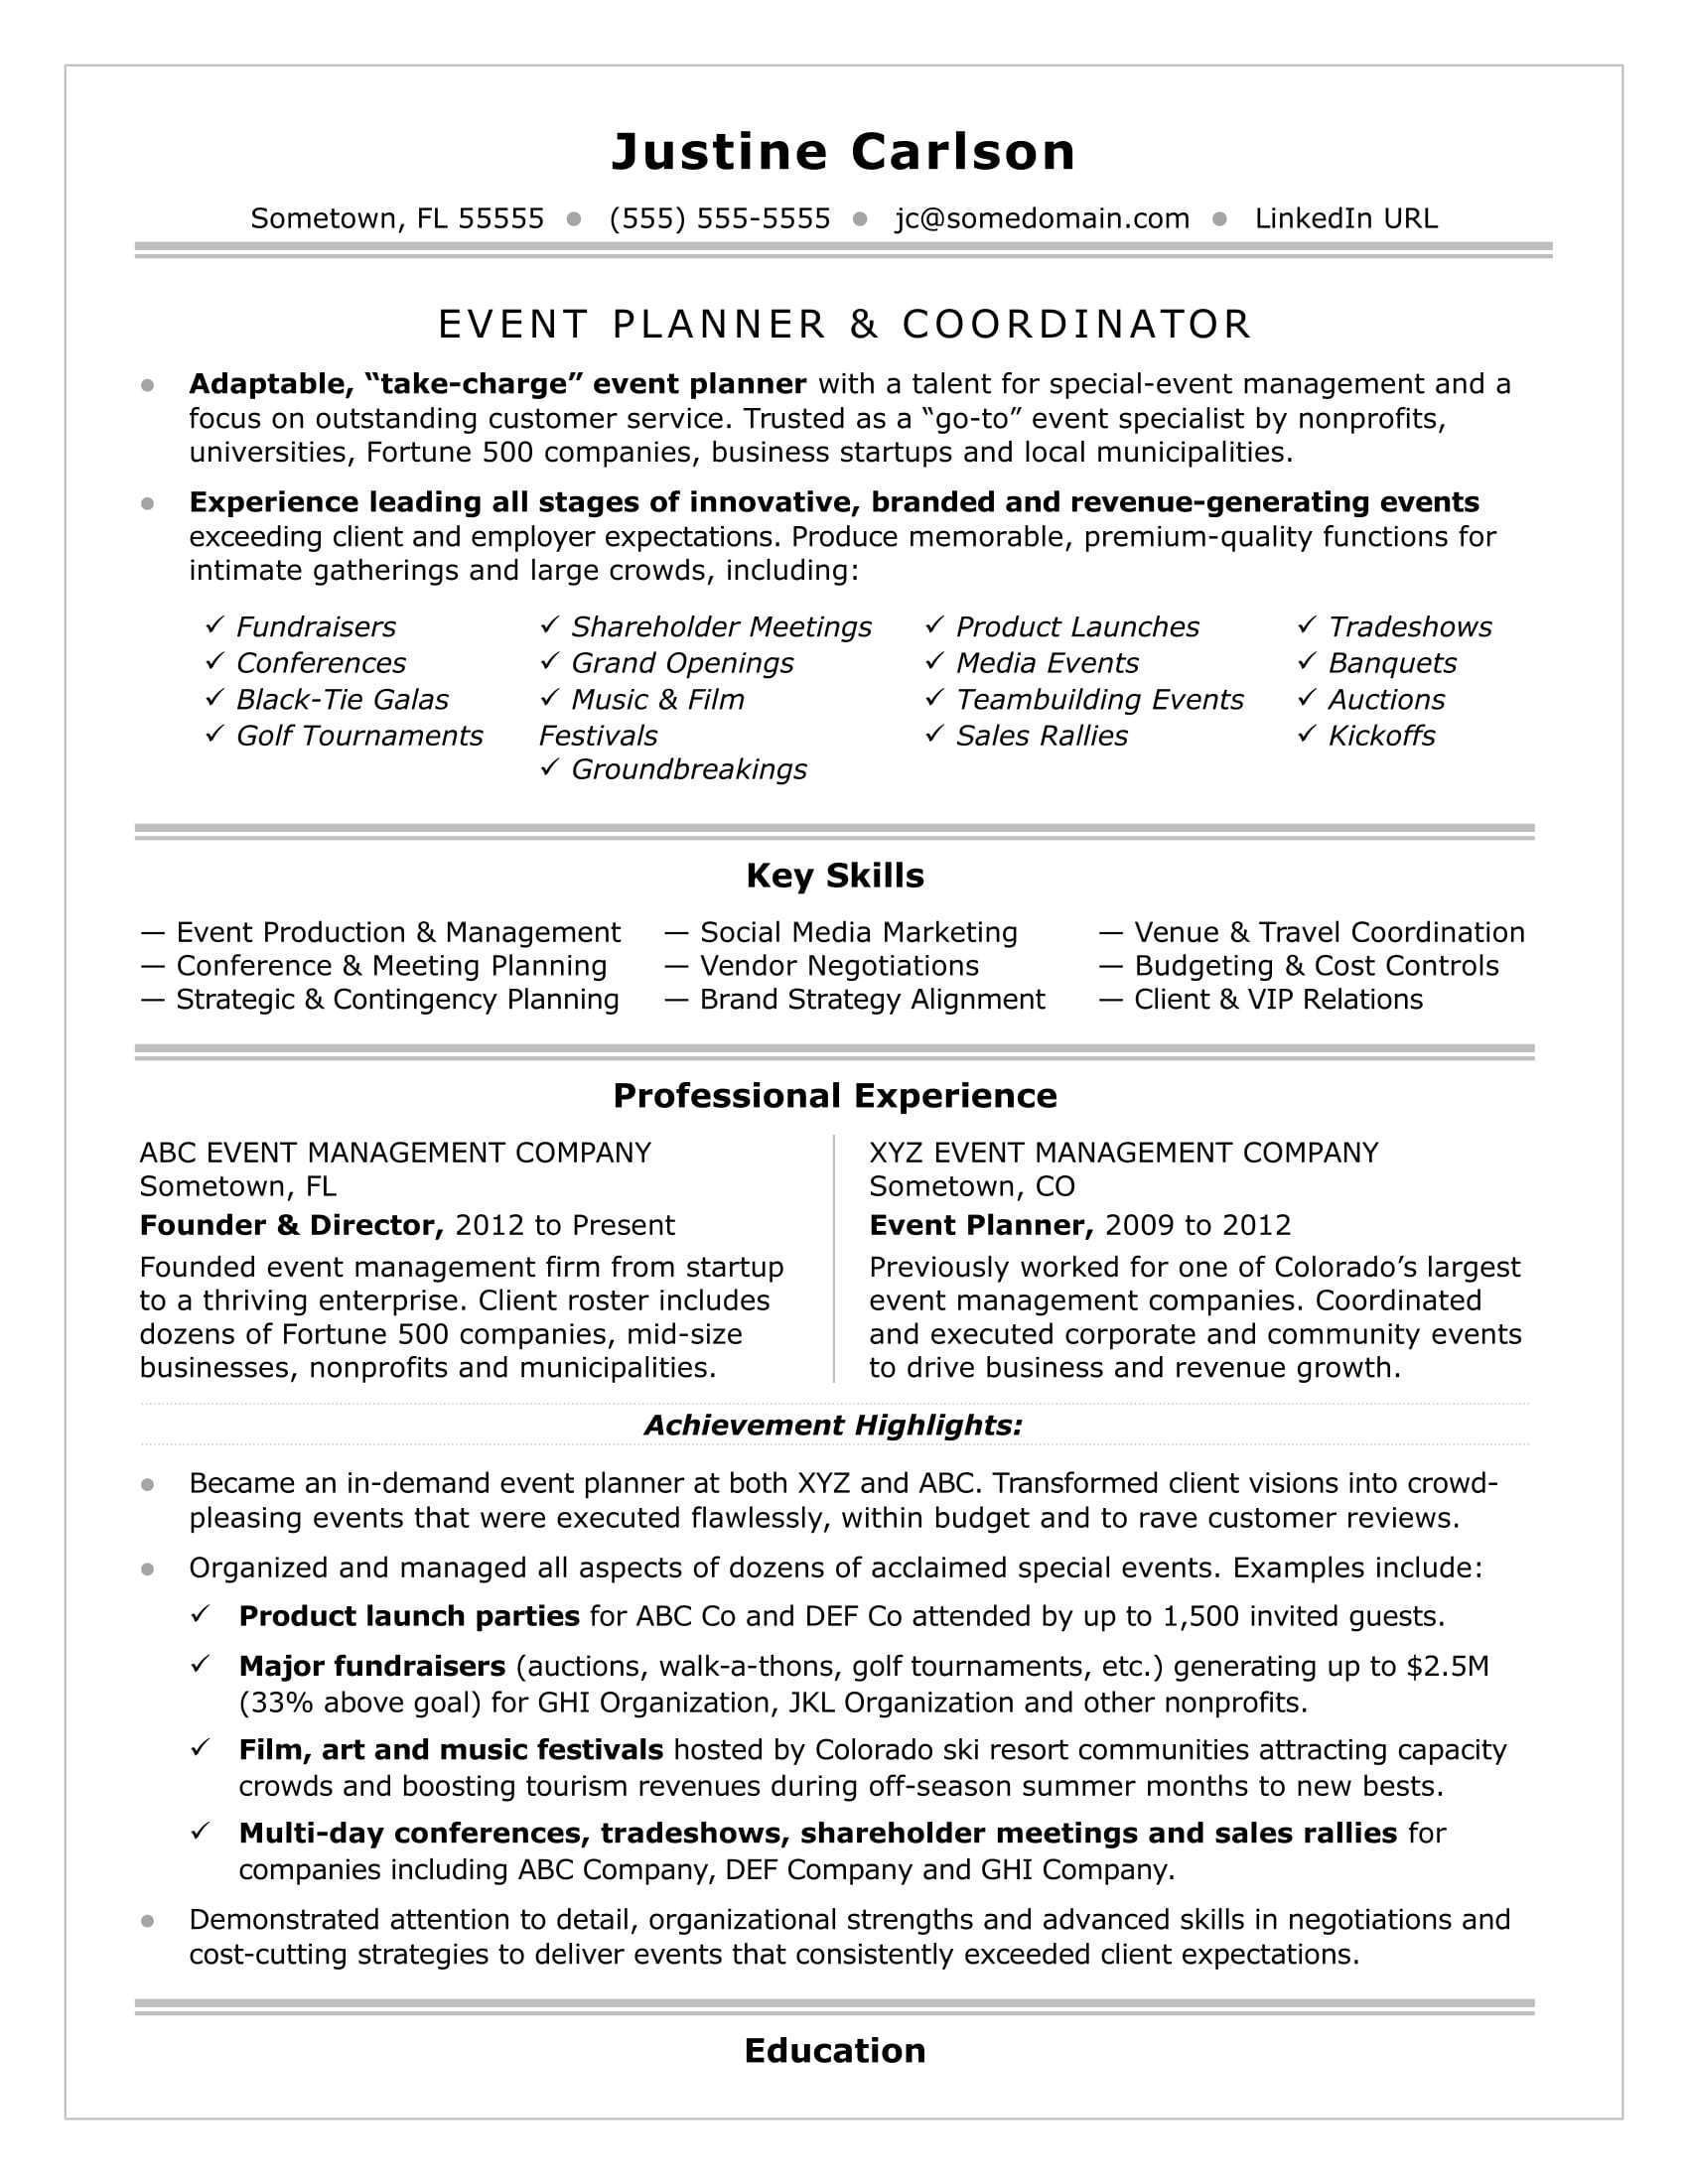 89 Customize Our Free Production Planner Cv Template Layouts with Production Planner Cv Template